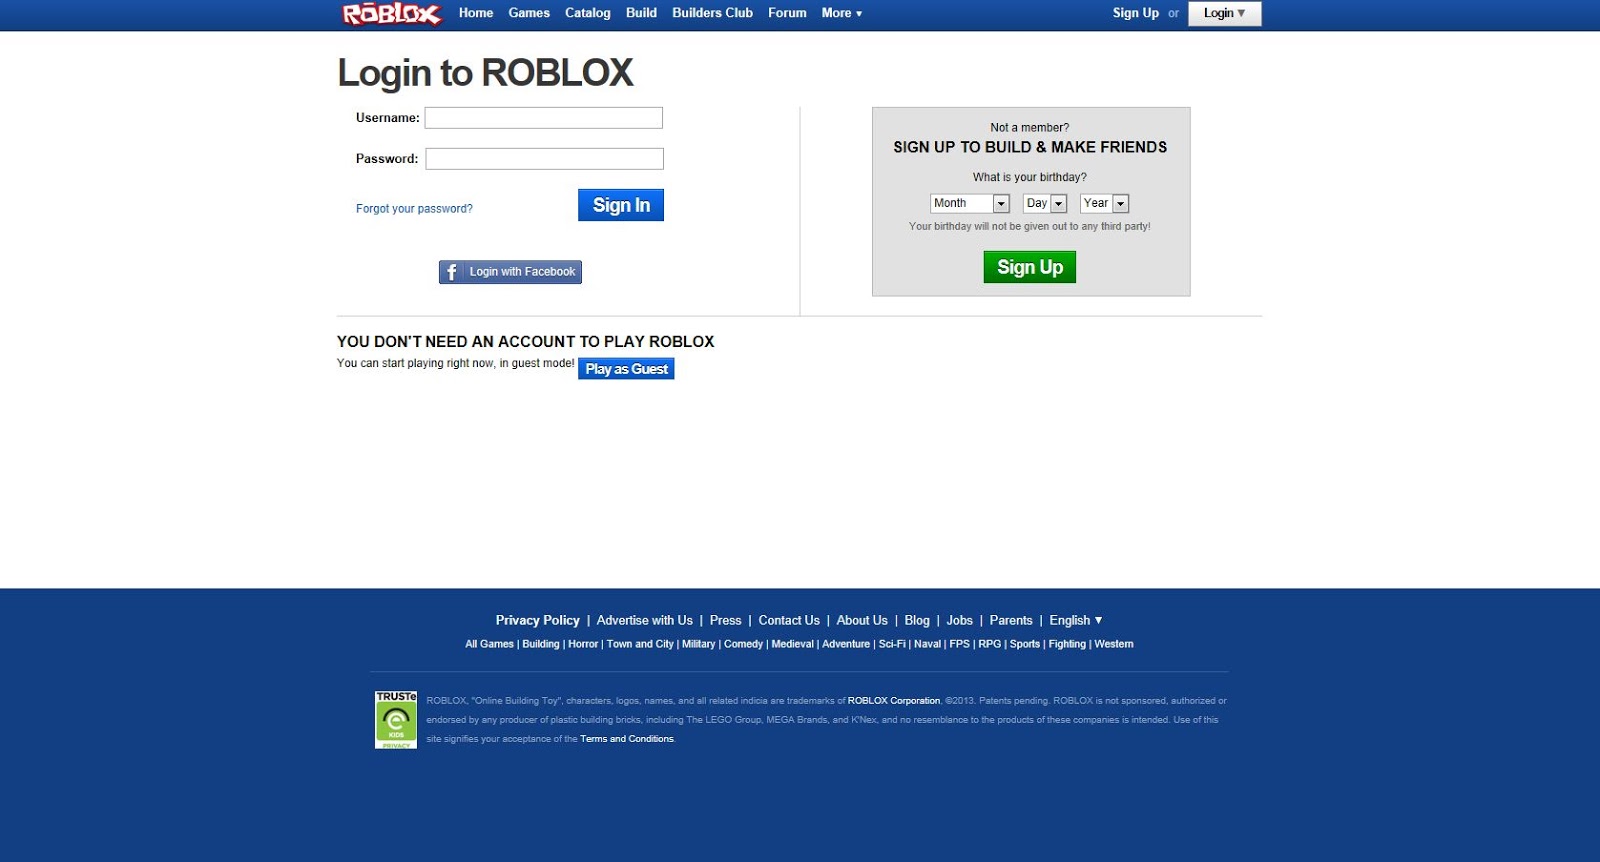 Unofficial Roblox Roblox Blue Panel Update On Website - roblox the game login and sign up